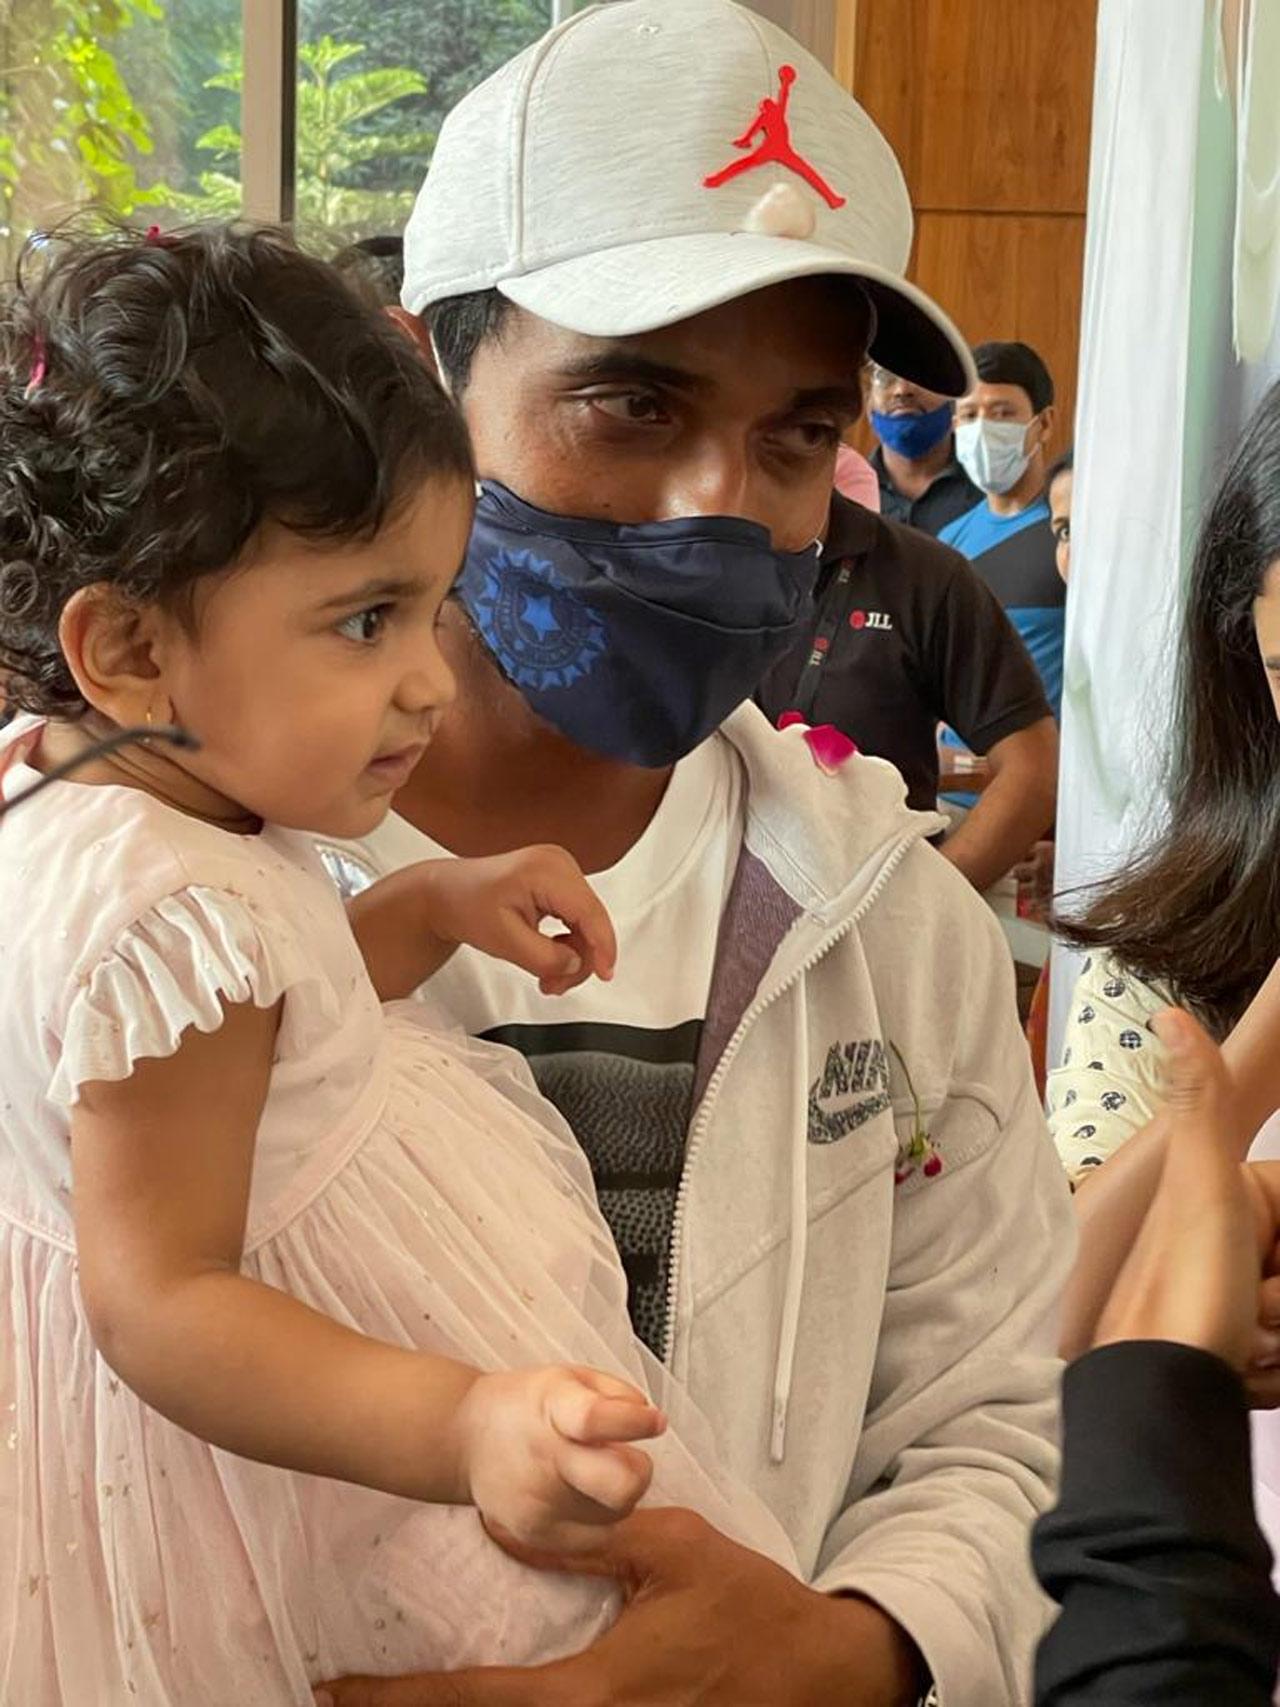 Ajinkya Rahane poses along with his daughter Aarya after he was given a warm welcome by his society members in Matunga. Picture/ mid-day reader Shripal Sangvi